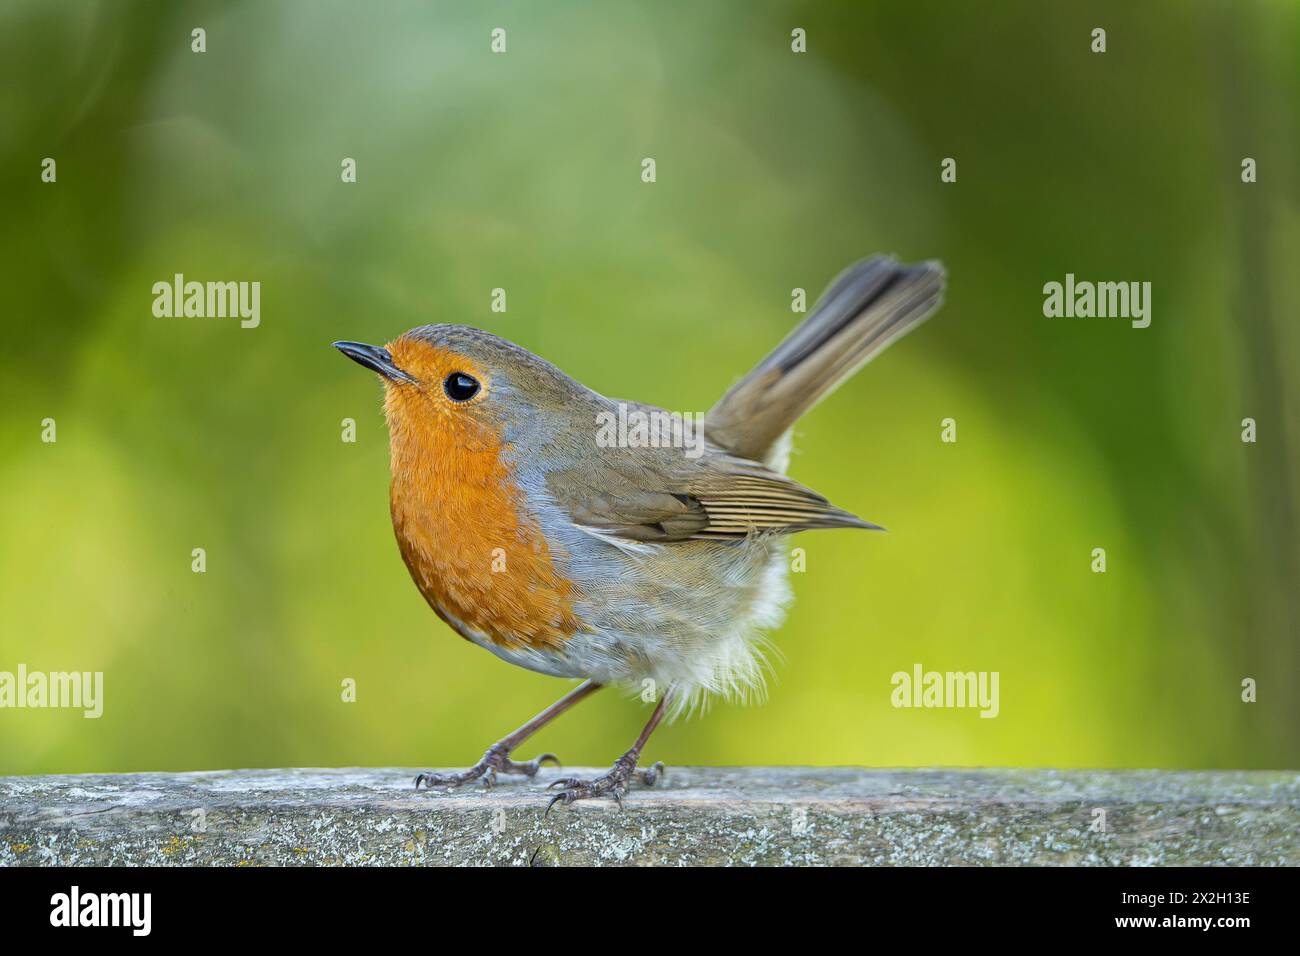 Close up detailed side view of a robin bird with its head tilted up on a sunny day. The bird is perched on a wood rail which is covered in lichen. Stock Photo